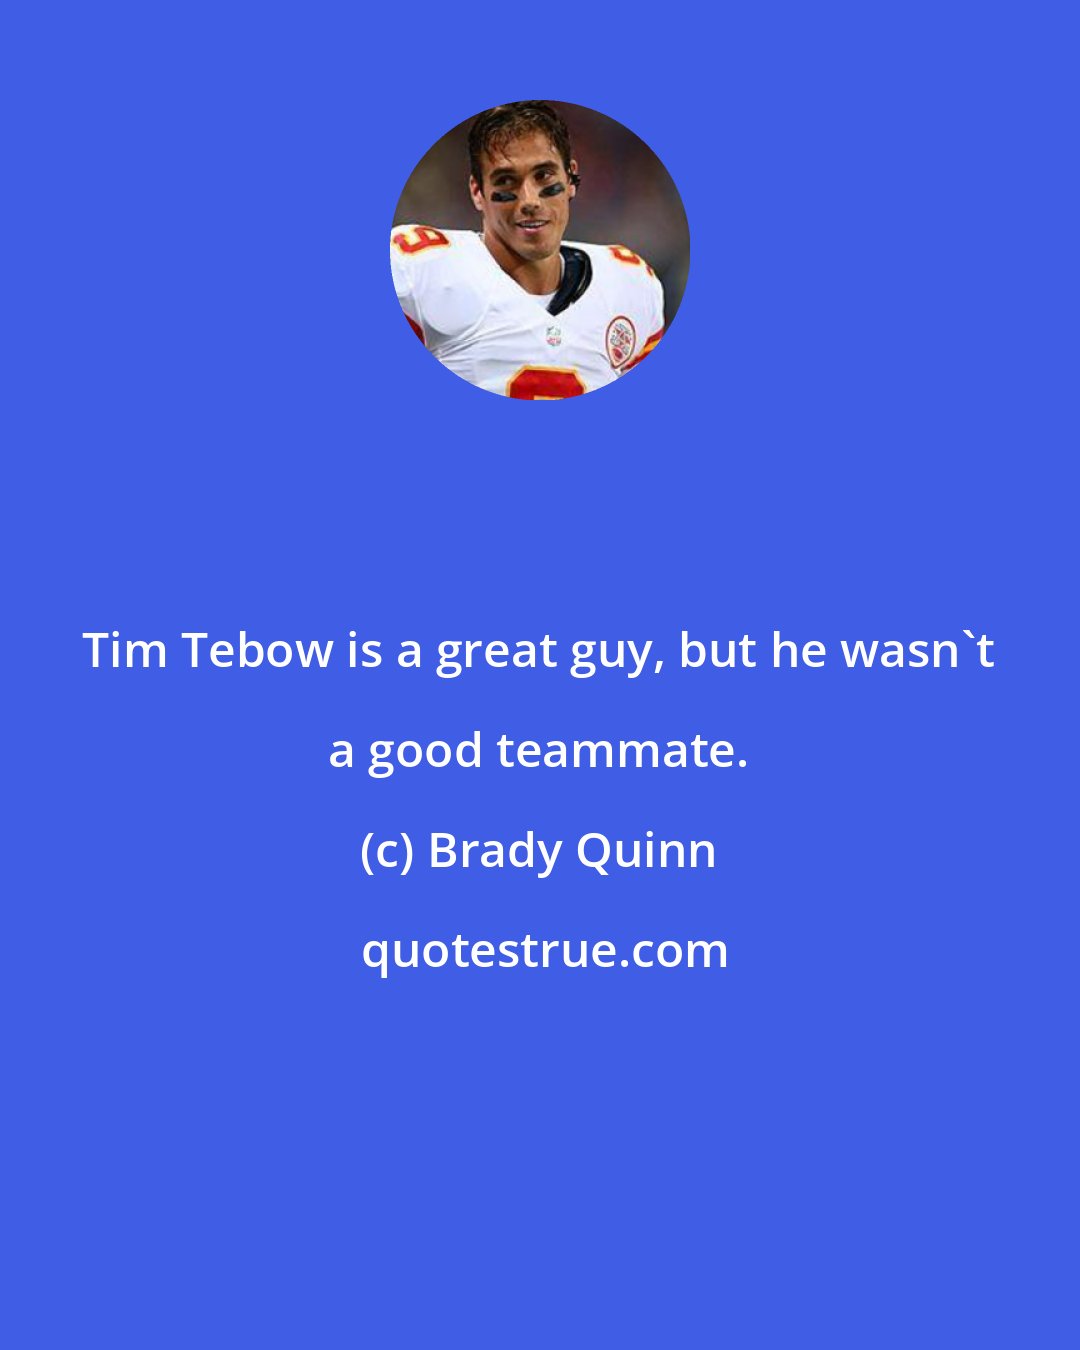 Brady Quinn: Tim Tebow is a great guy, but he wasn't a good teammate.